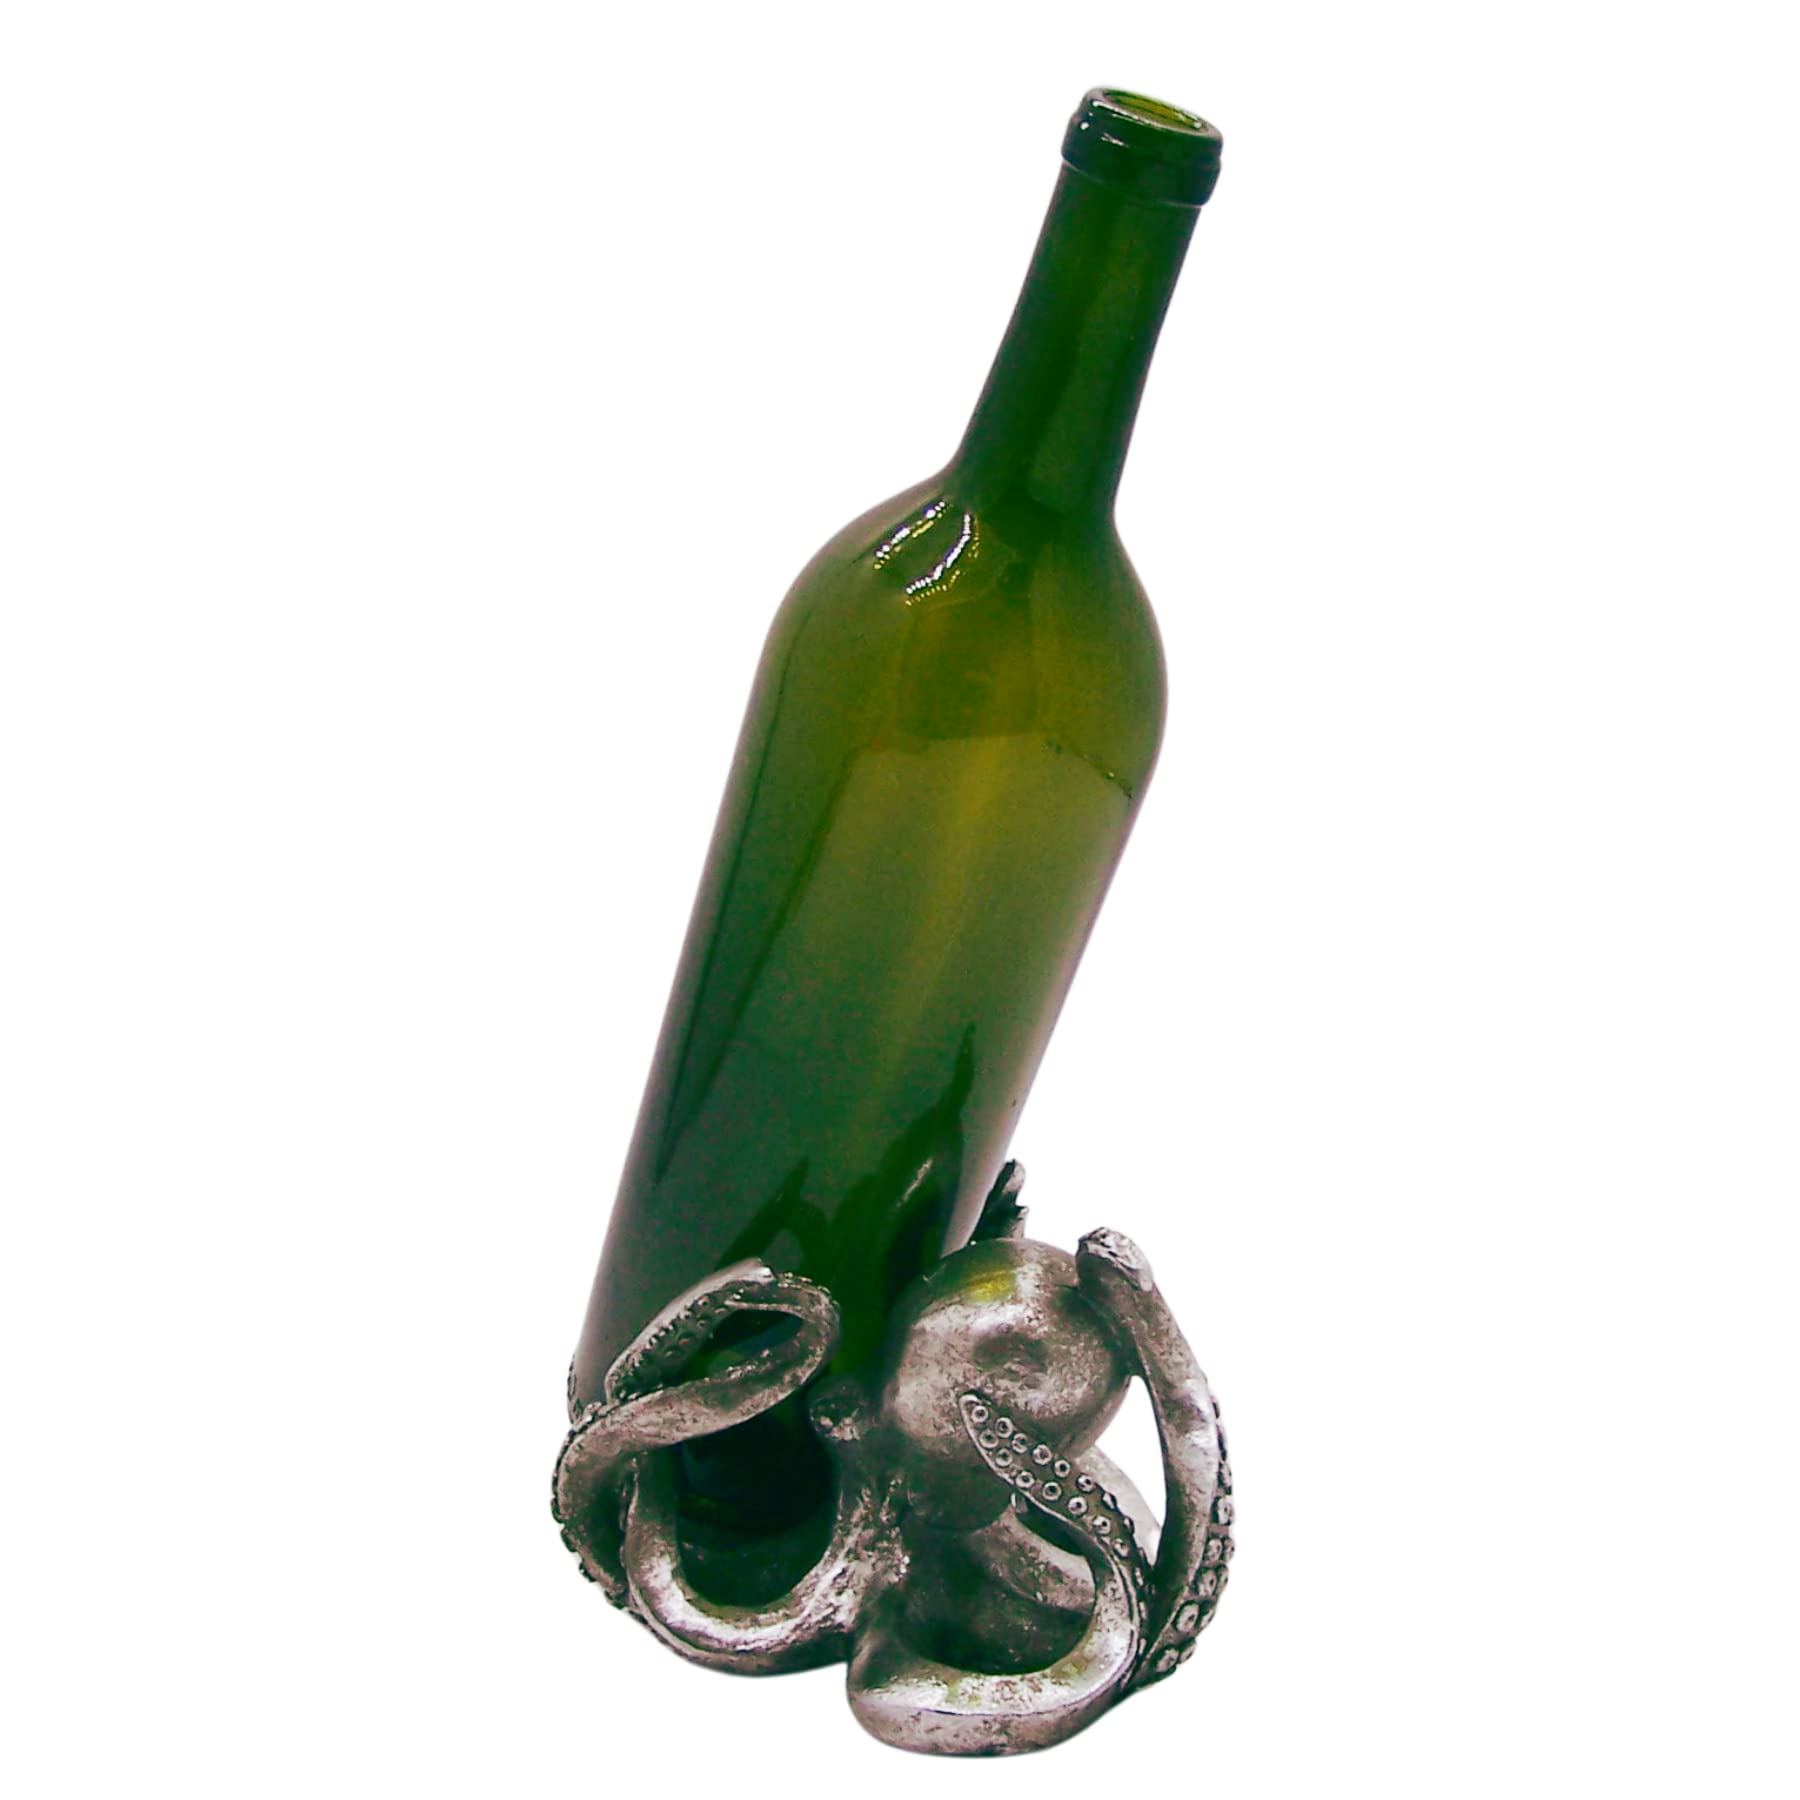 Octopus Wine Bottle Holder, Nautical Décor, Freestanding Tabletop Decoration, 4 Inches